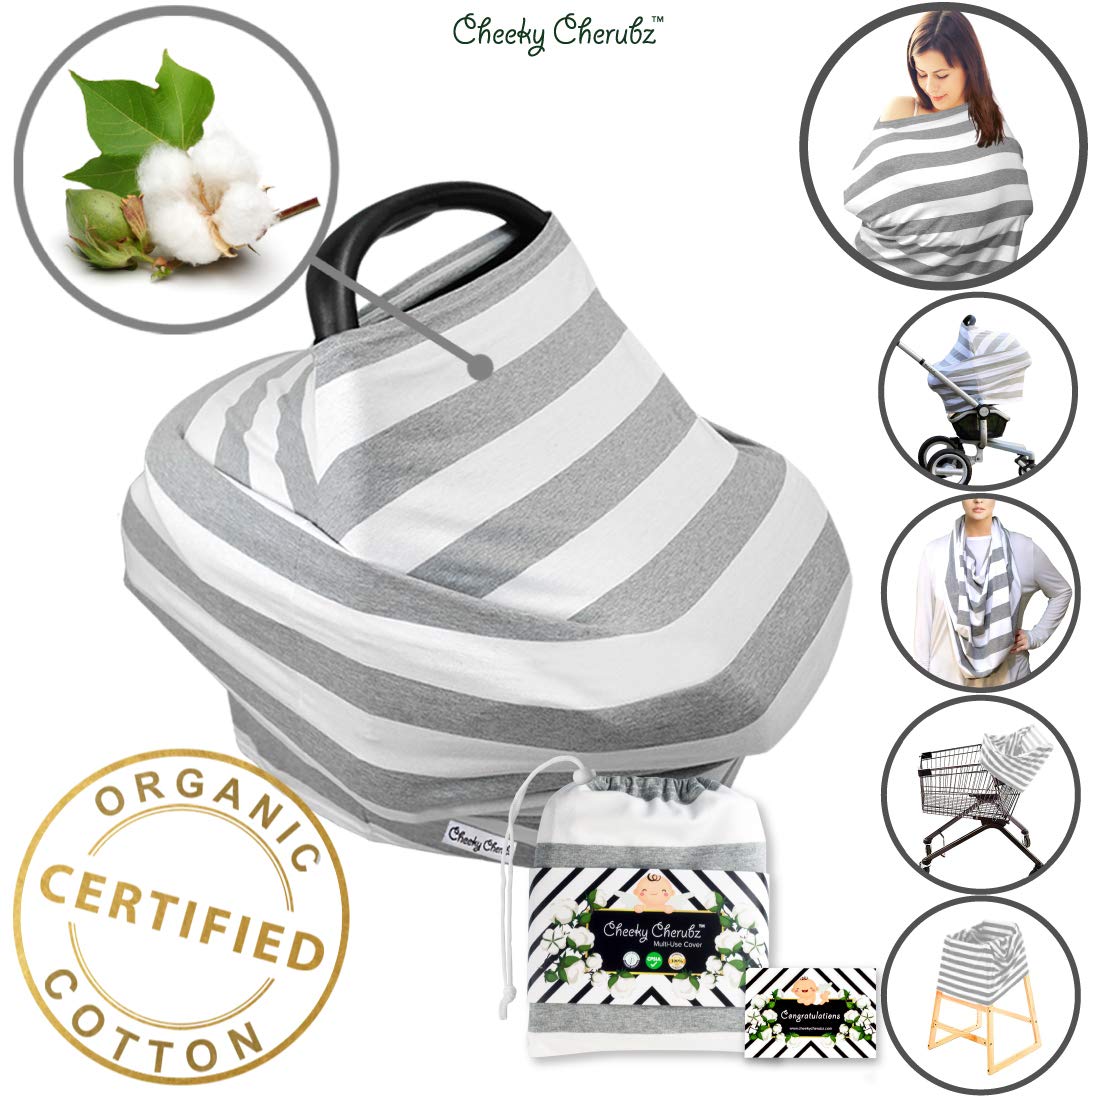 the acplaypen.com Organic Cotton ☆ Nursing Breastfeeding Cover Scarf, Baby Car Seat Canopy, Canopies, Shopping Cart, Stroller, Carseat Covers for Girls and Boys Best Multi-Use Infinity Stretchy Shawl... 